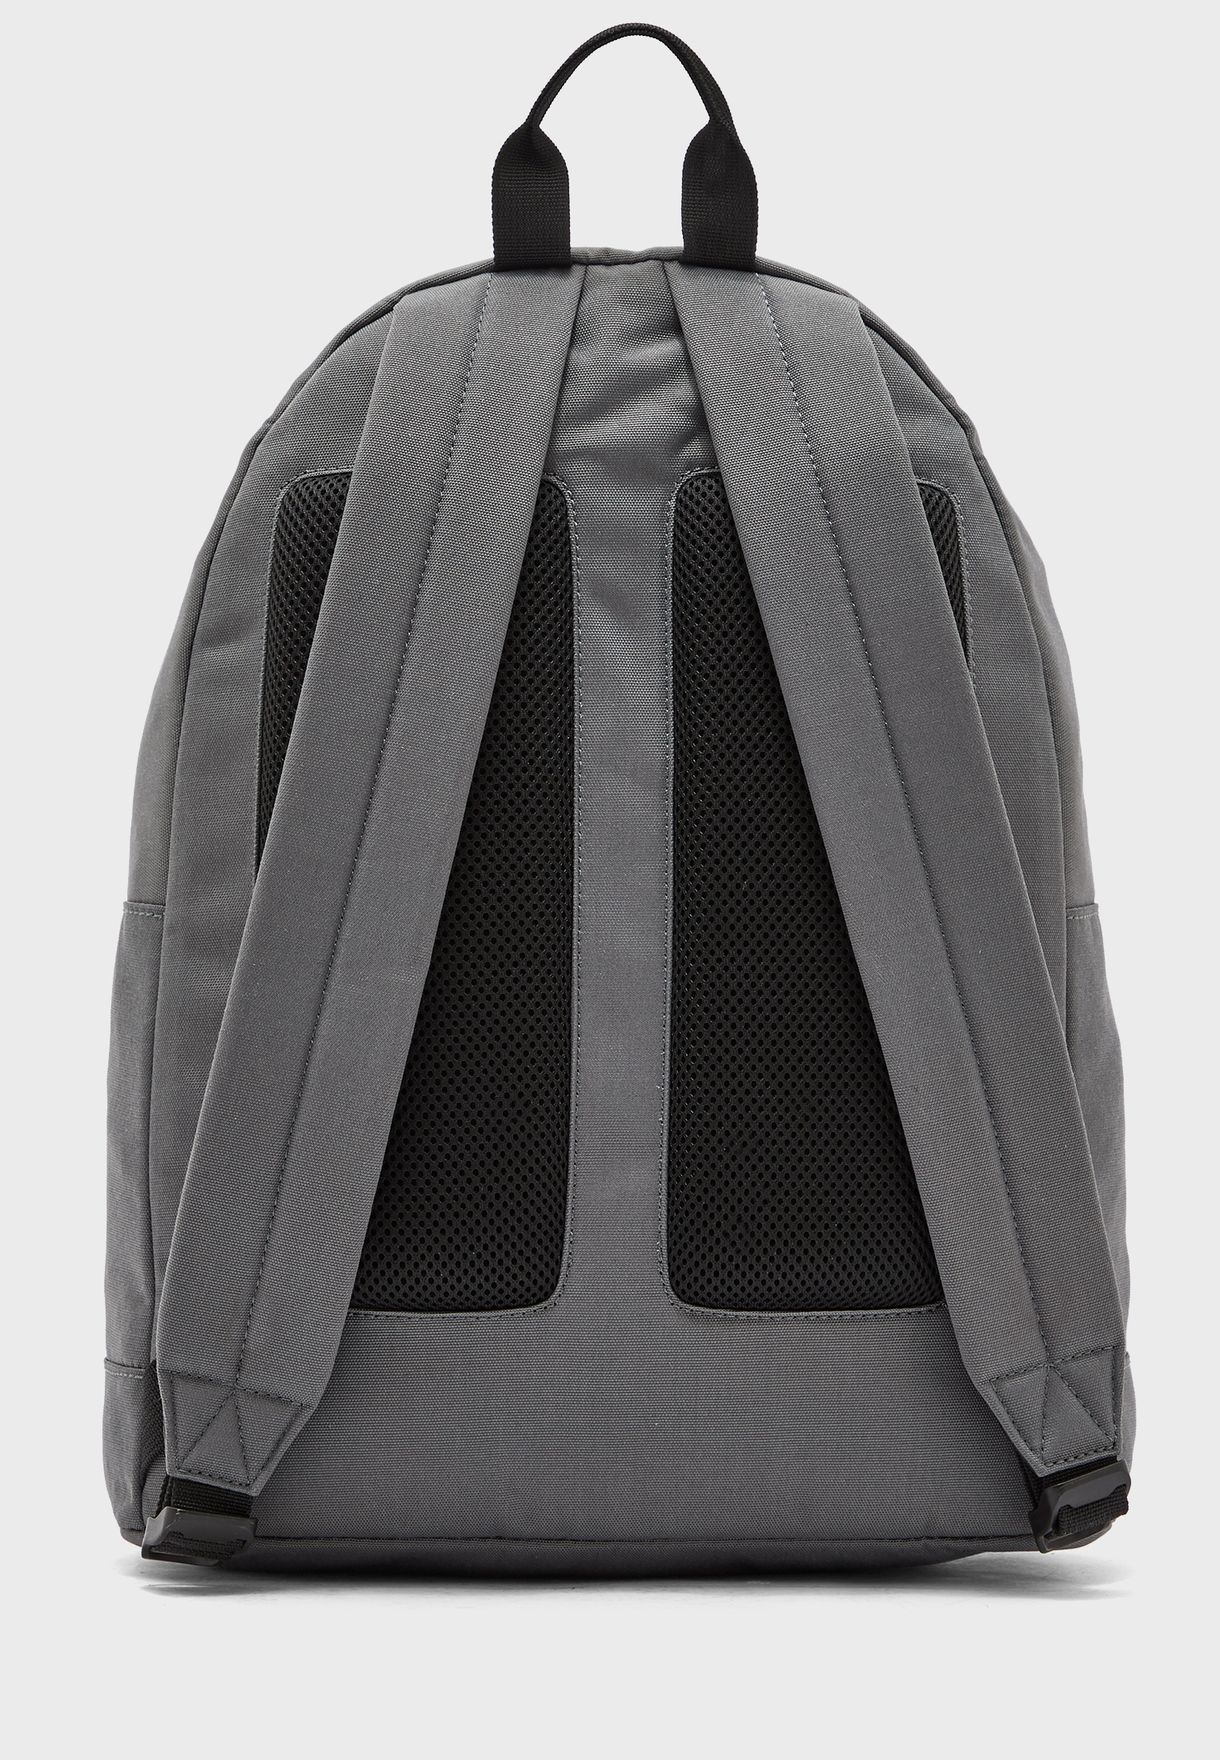 Neocroc Classic Solid Backpack